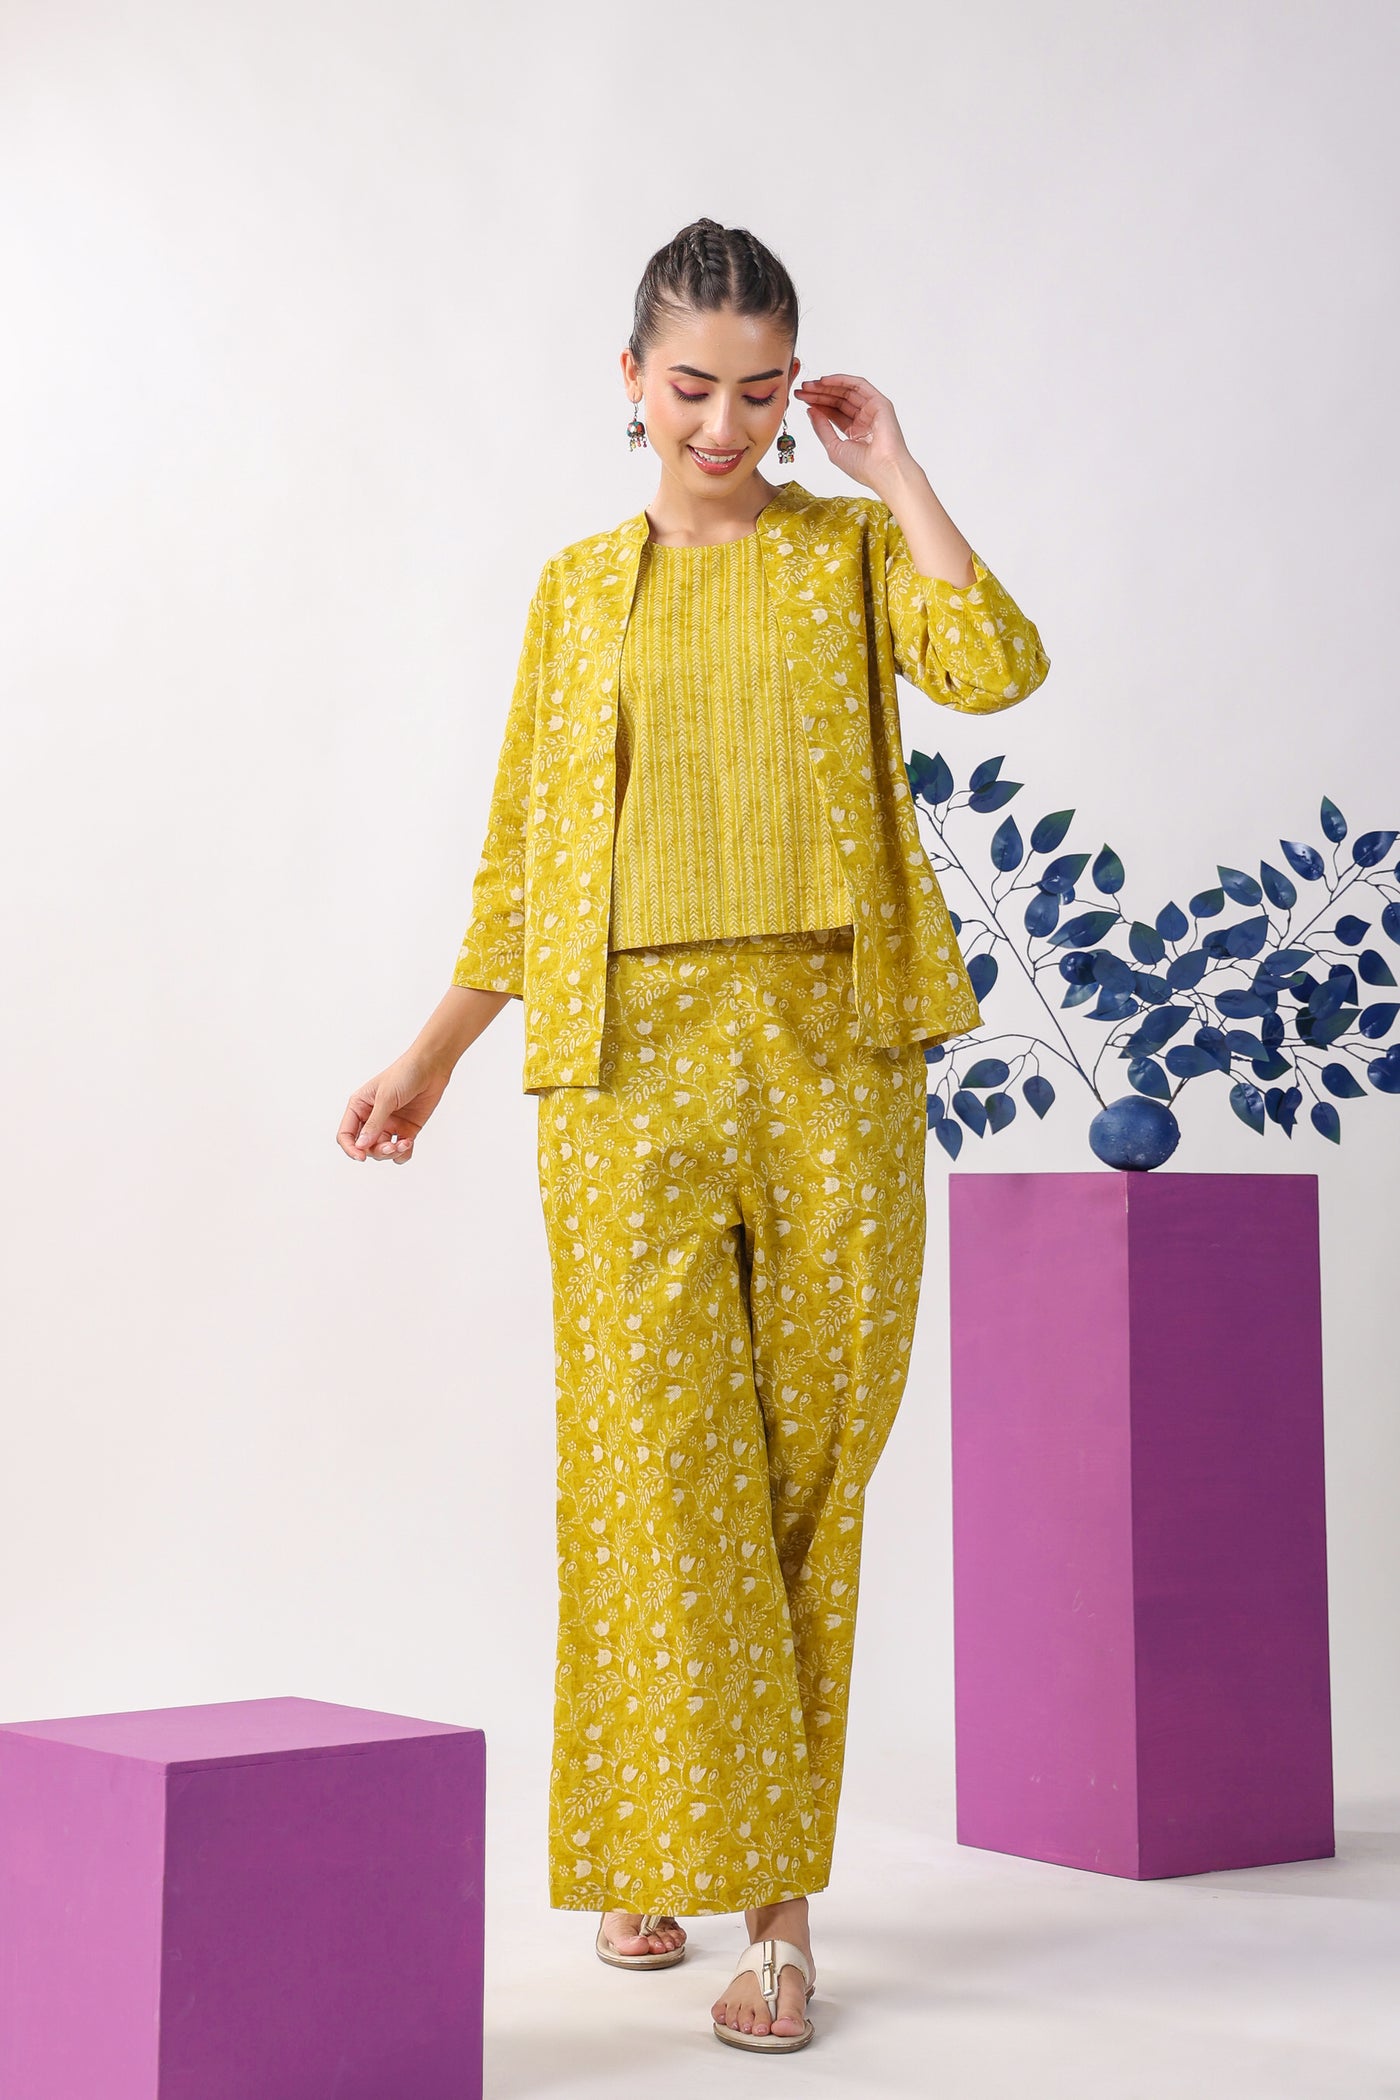 Dainty Florals with Arrows on Yellow Cotton Shrug Set